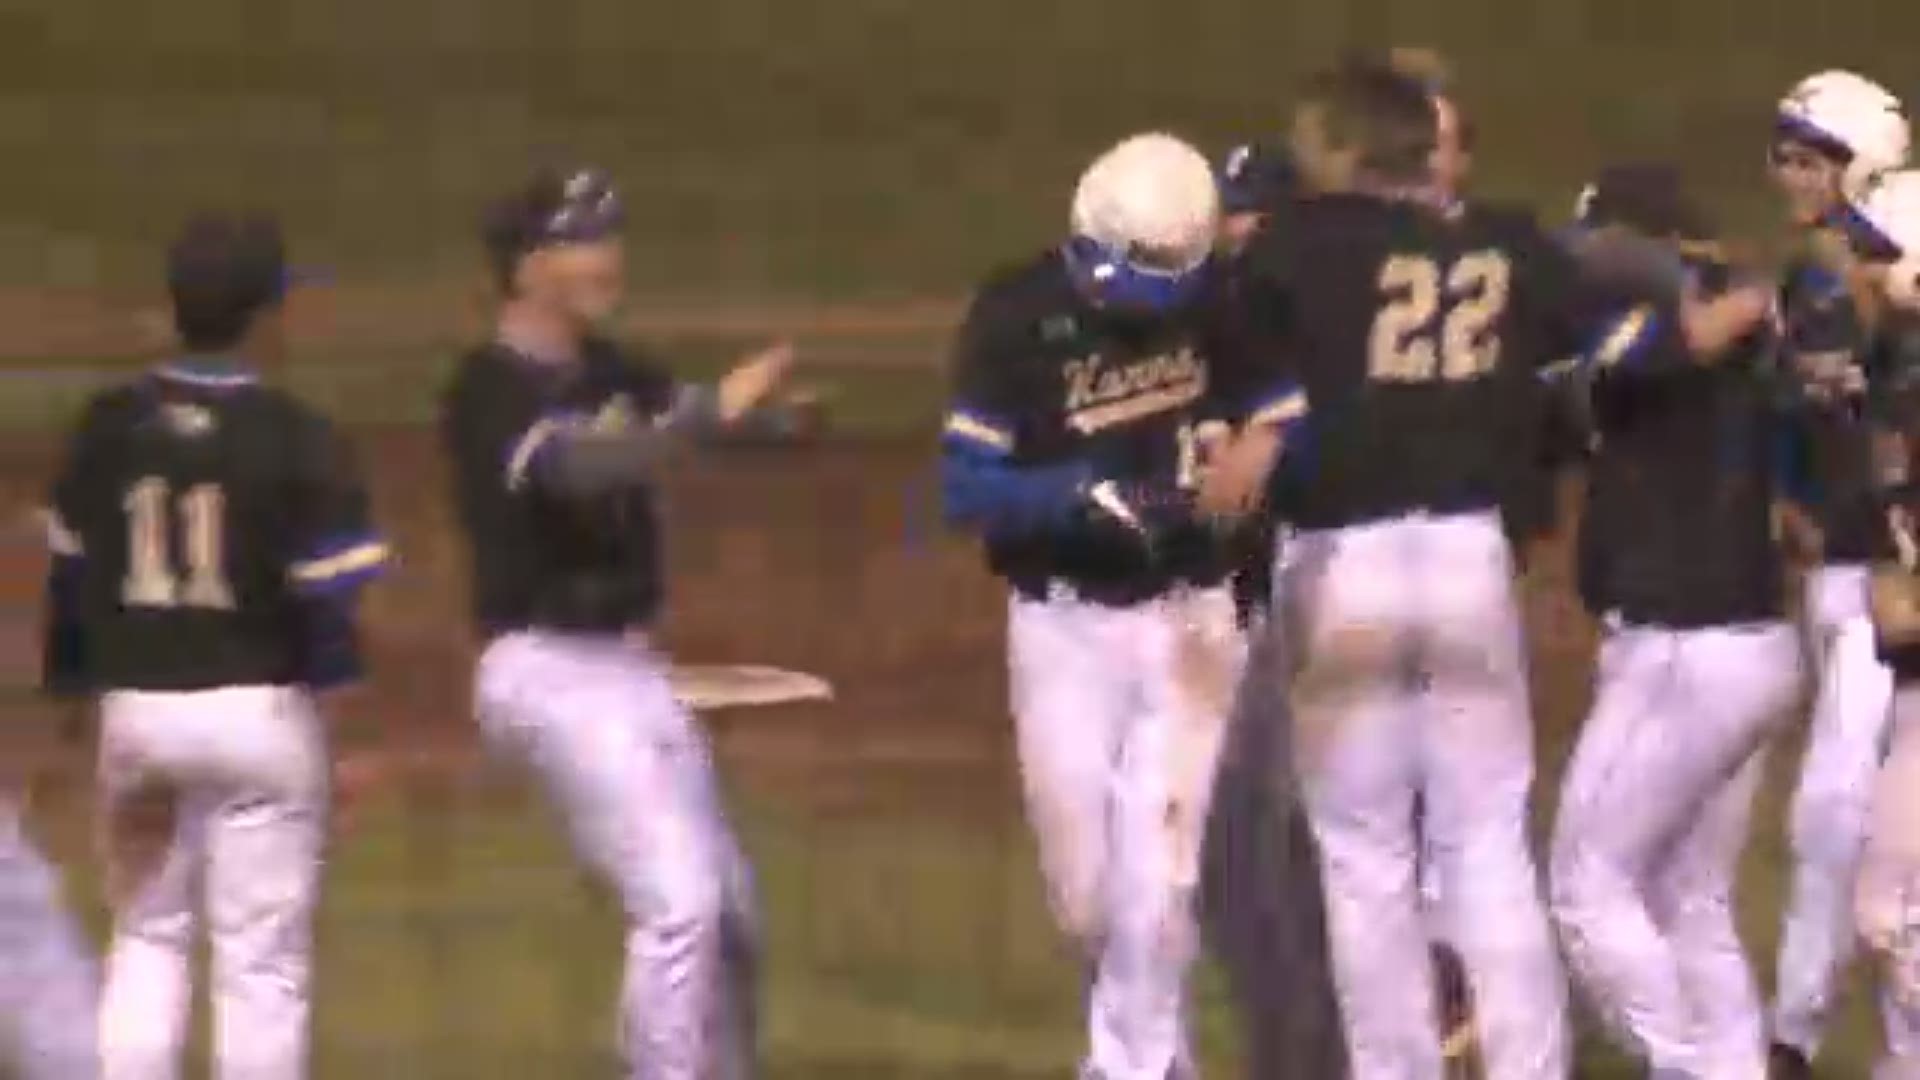 Karns senior Ryder Green hit a two-run, walk-off single to give the Beavers a 4-3 win over William Blount on Friday.